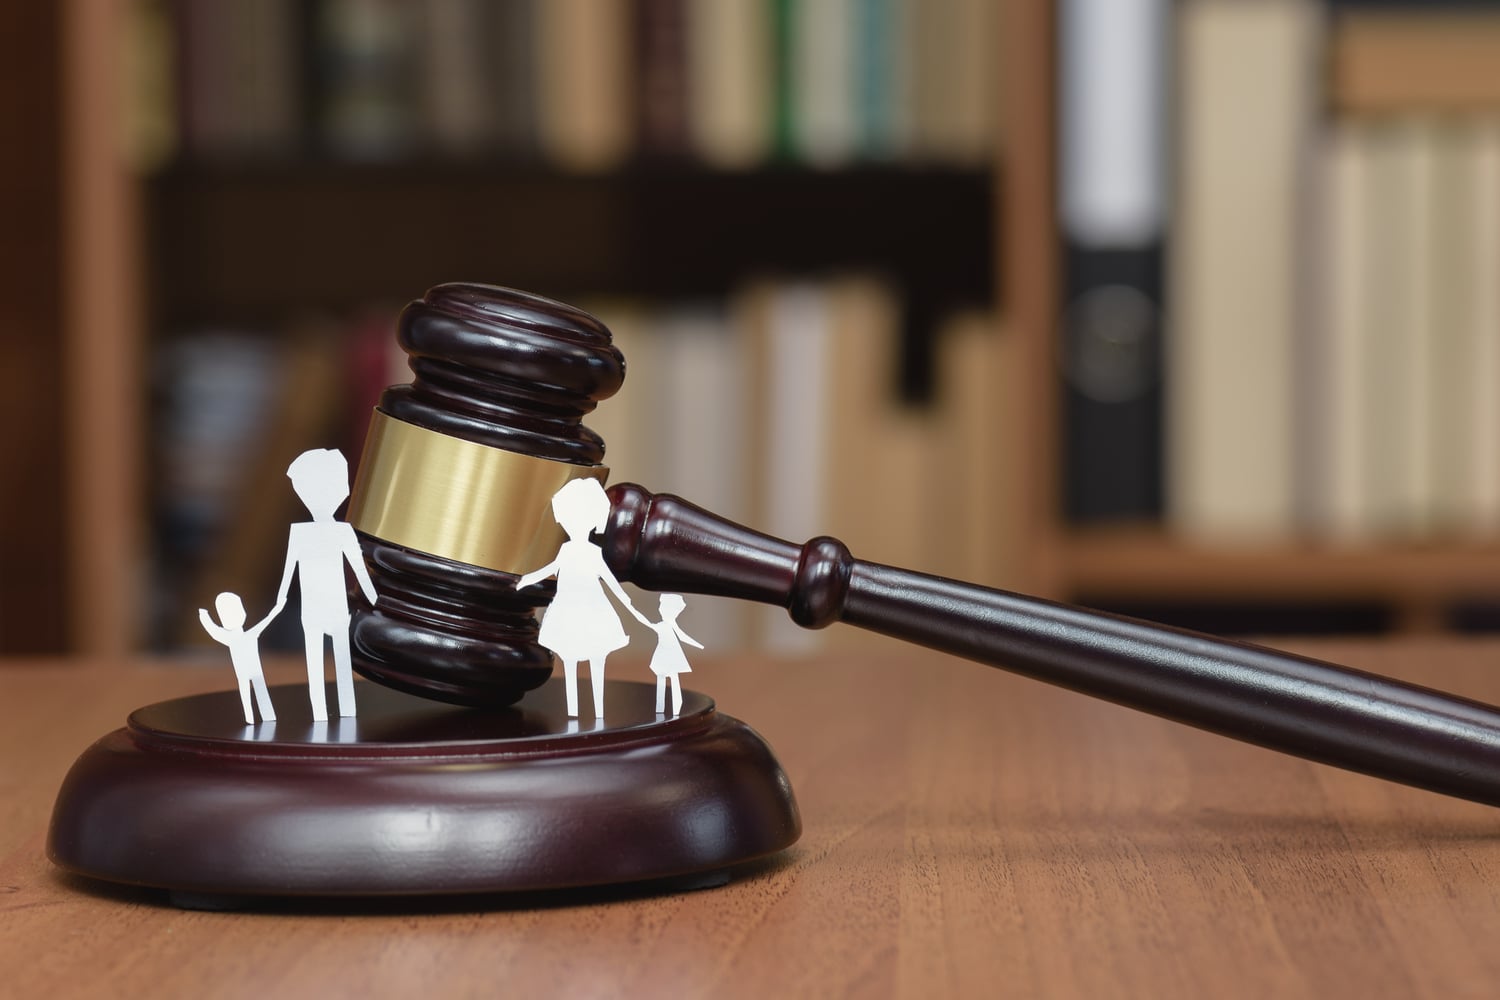 COURT OF APPEALS DECISIONS REGARDING FAMILY LAW